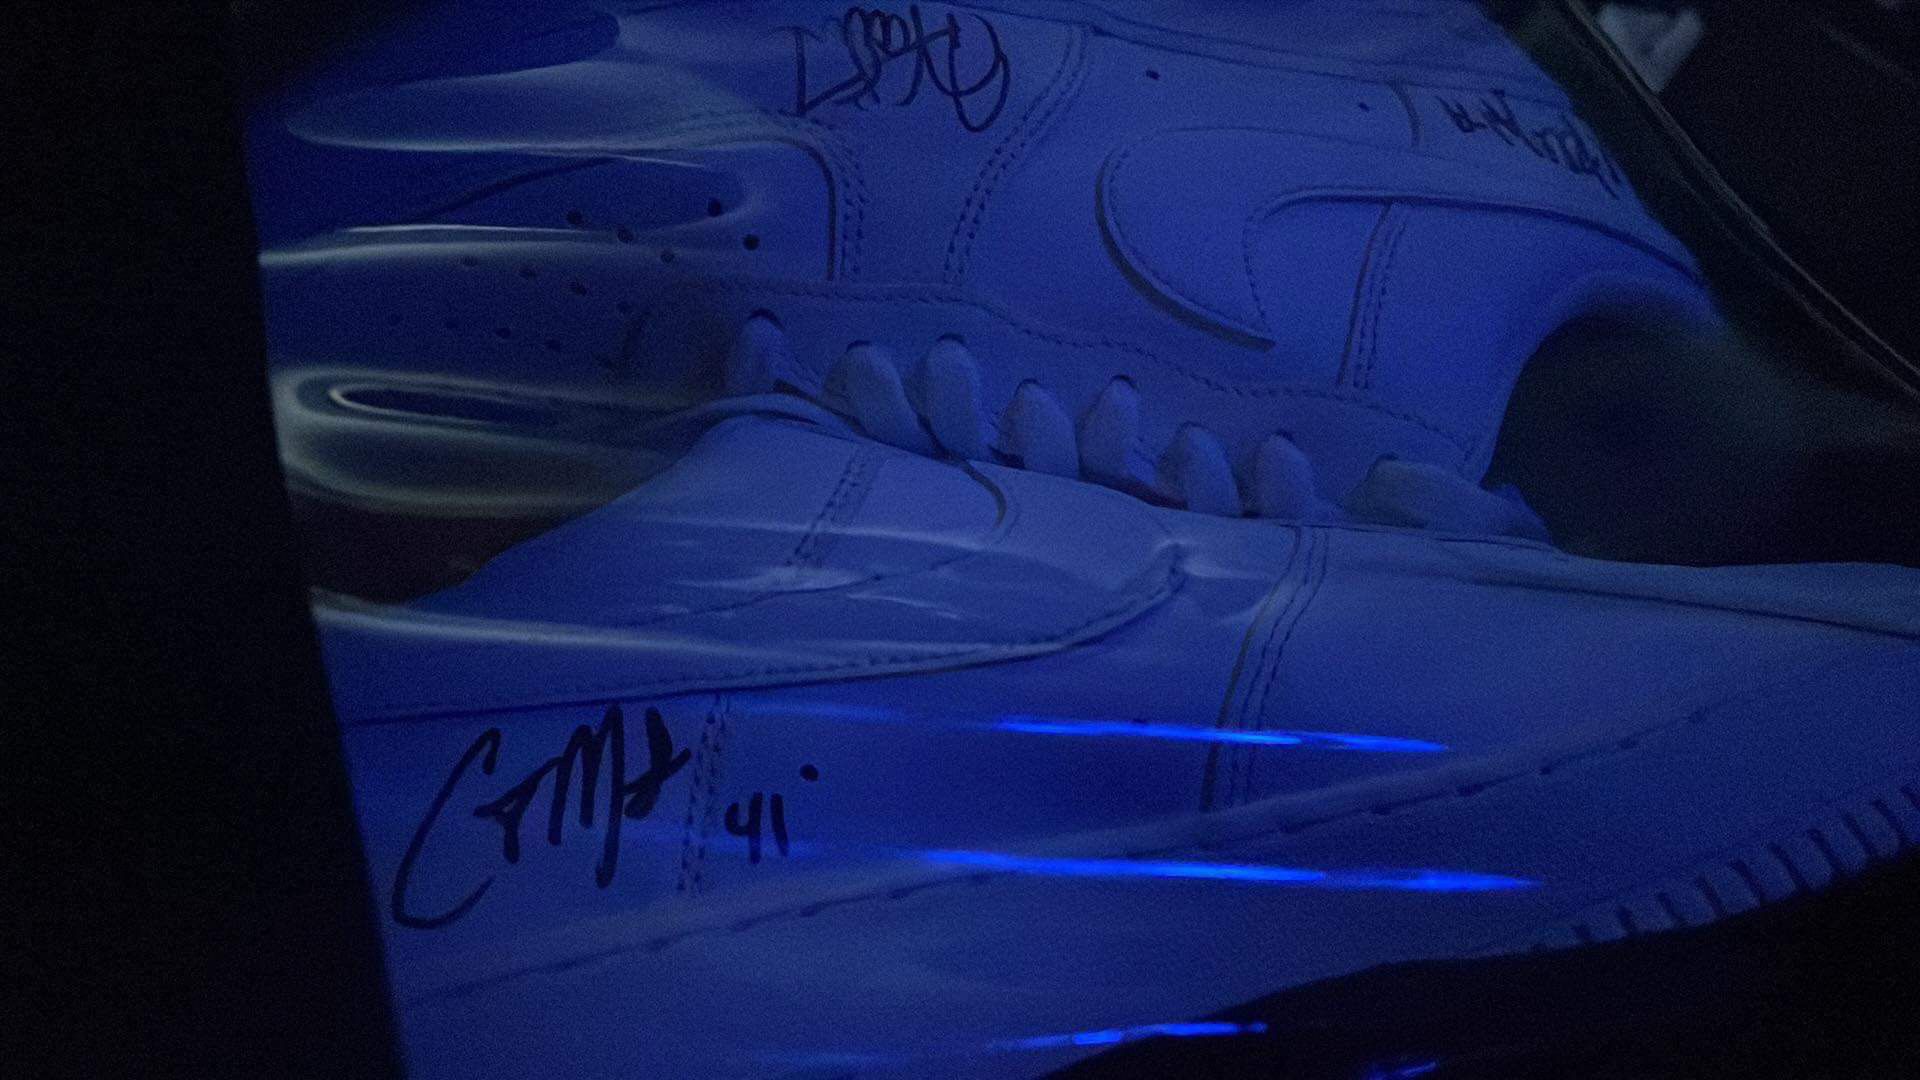 SIGNED SHOES